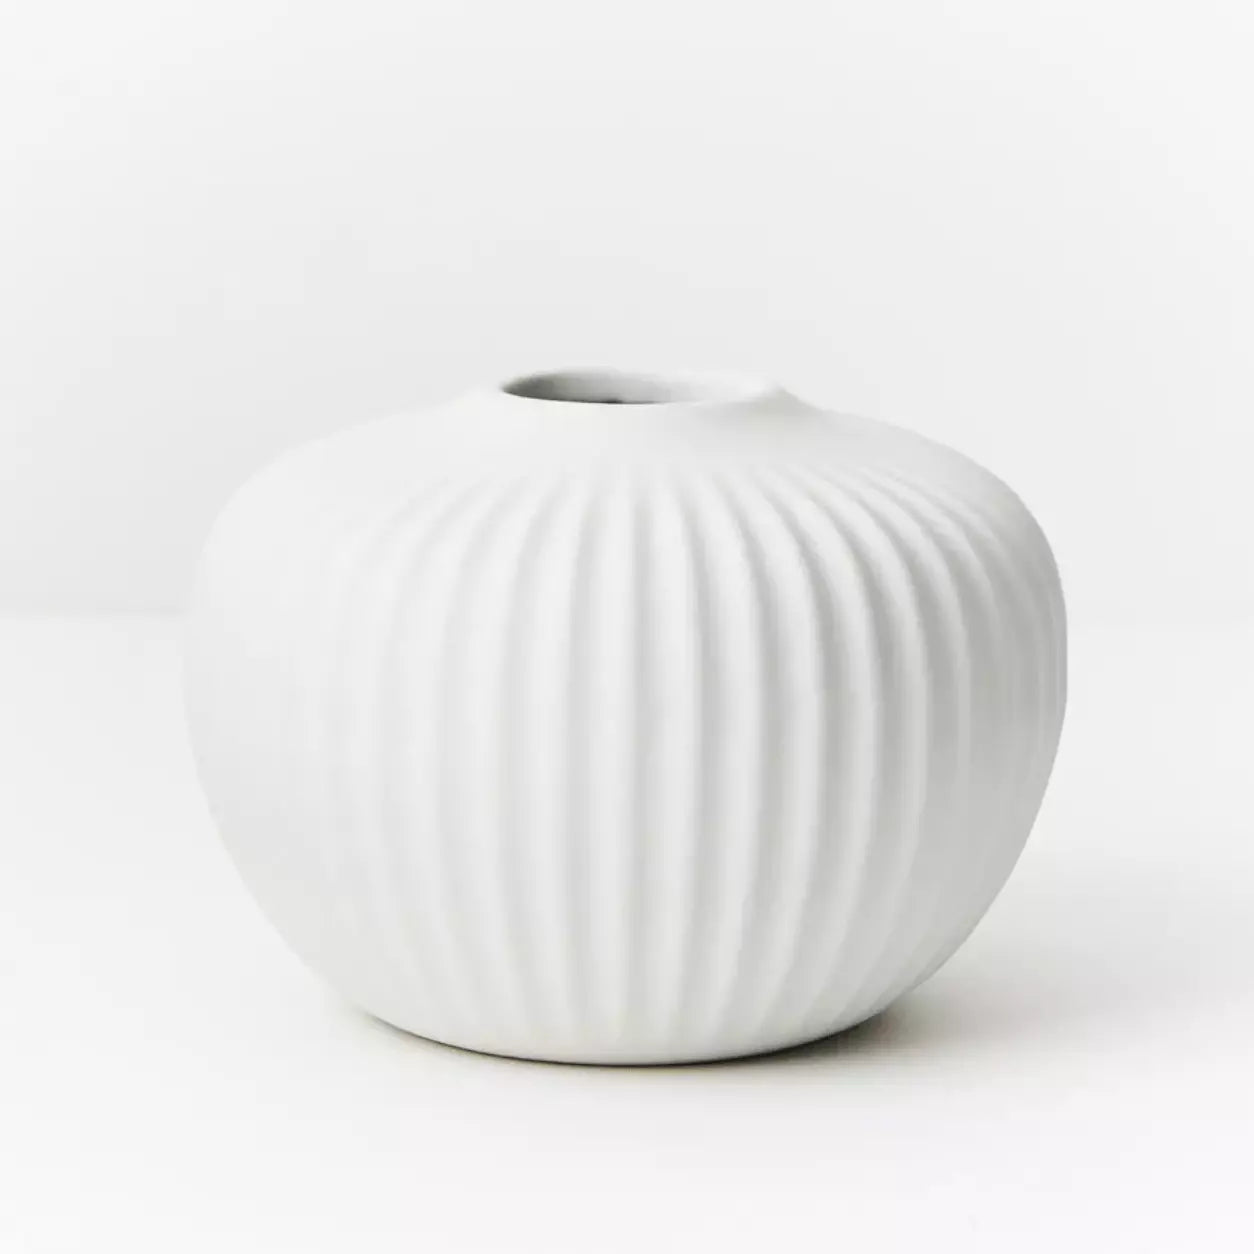 A Taza Vase - White by Floral Interiors on a white surface.